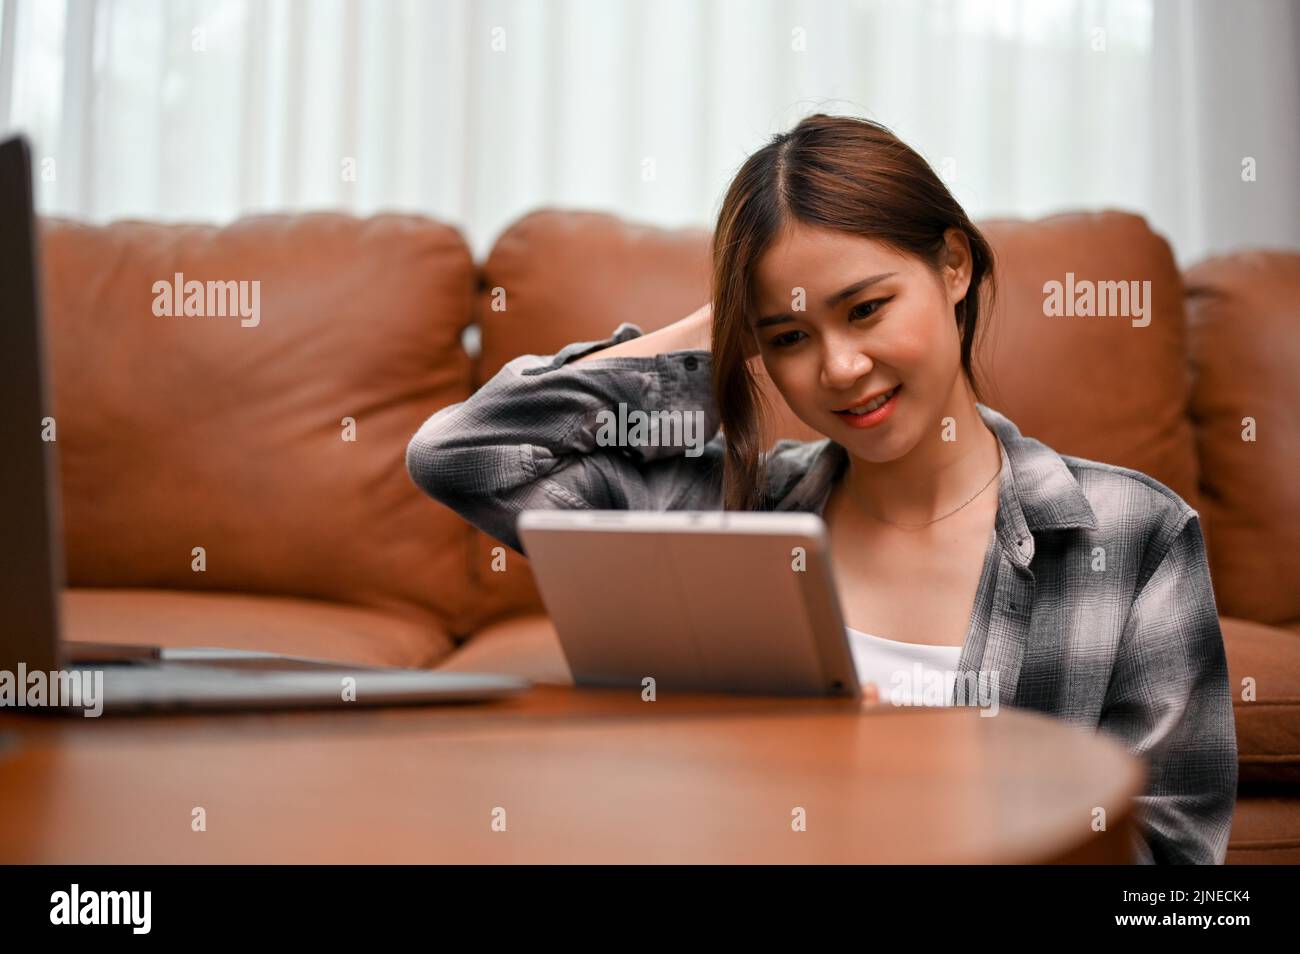 Pretty Asian young woman uses digital tablet touchpad to chat with her online friends while relaxing in her living room. Stock Photo